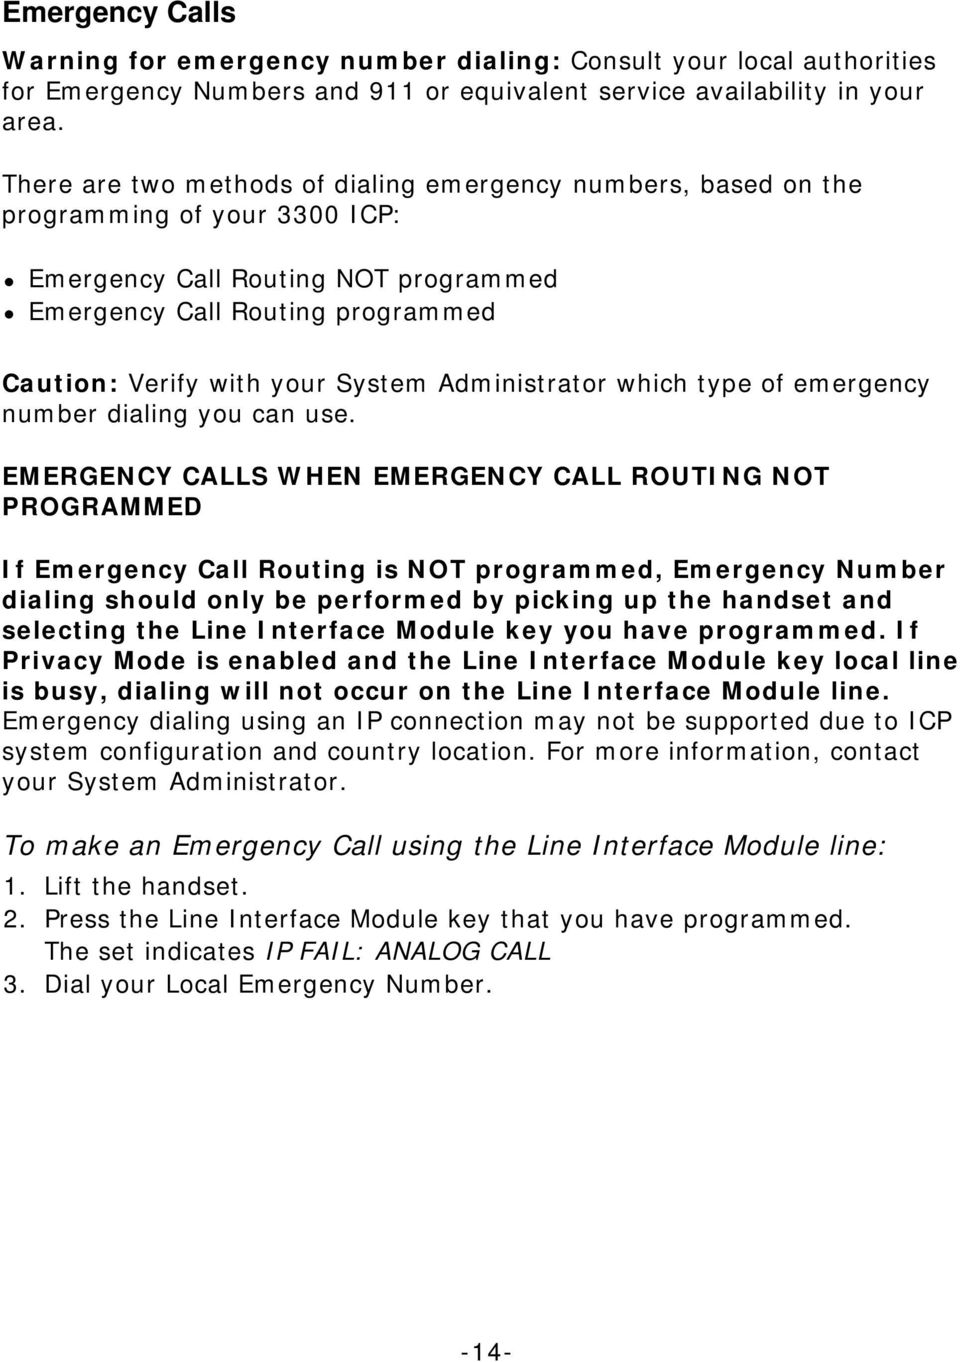 Administrator which type of emergency number dialing you can use.